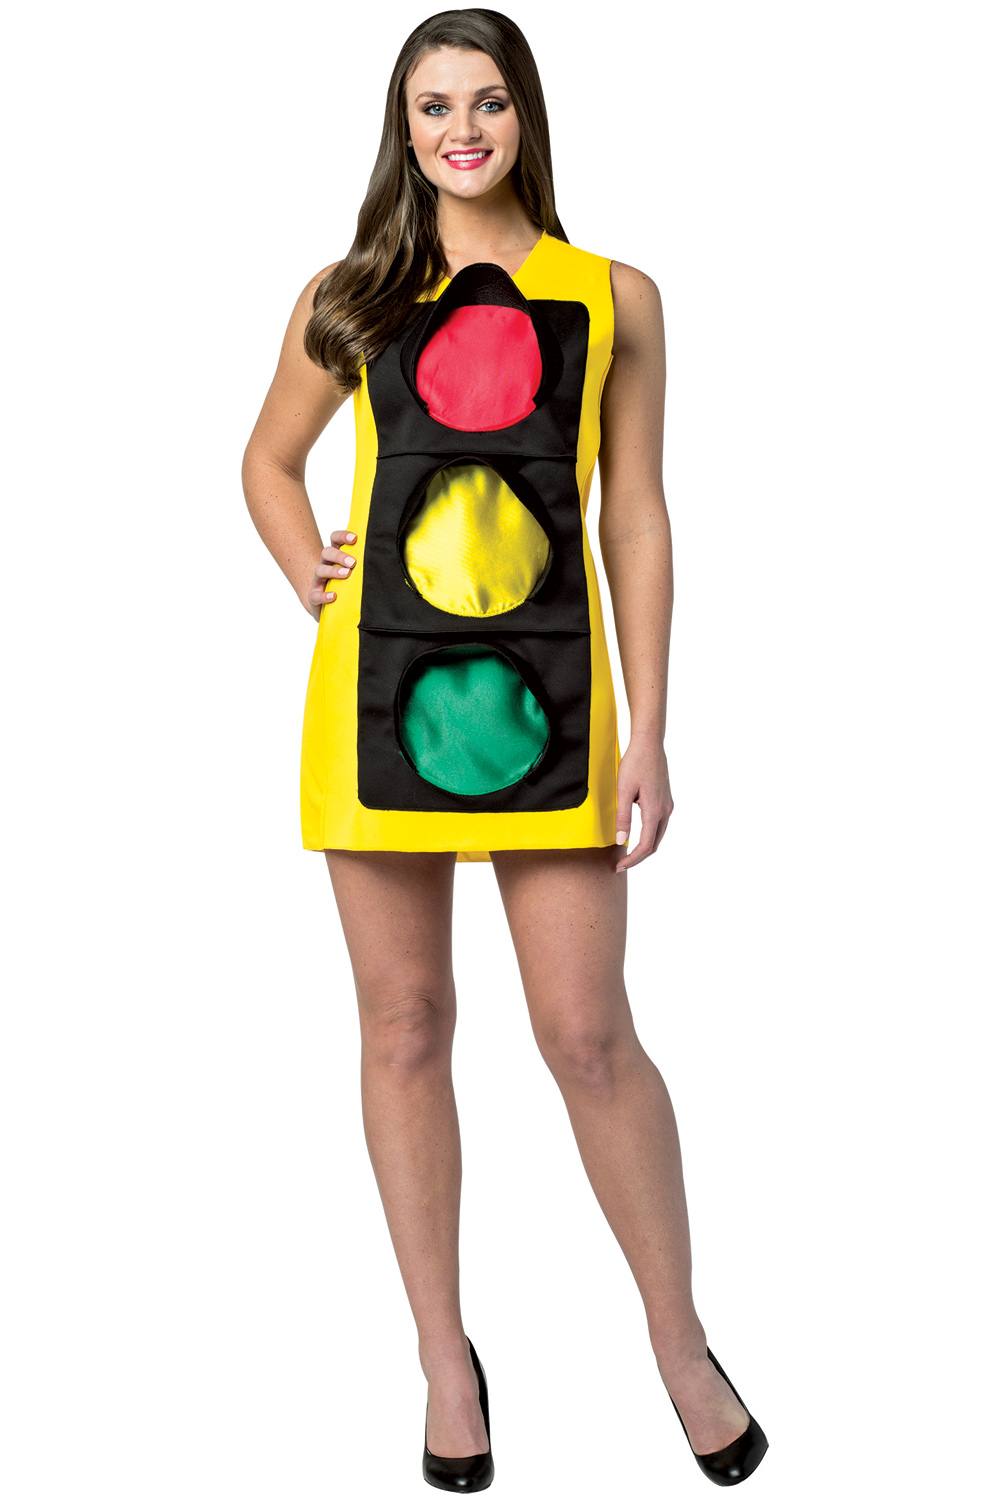 Pull out all the stops this Halloween with this hilarious traffic light cos...